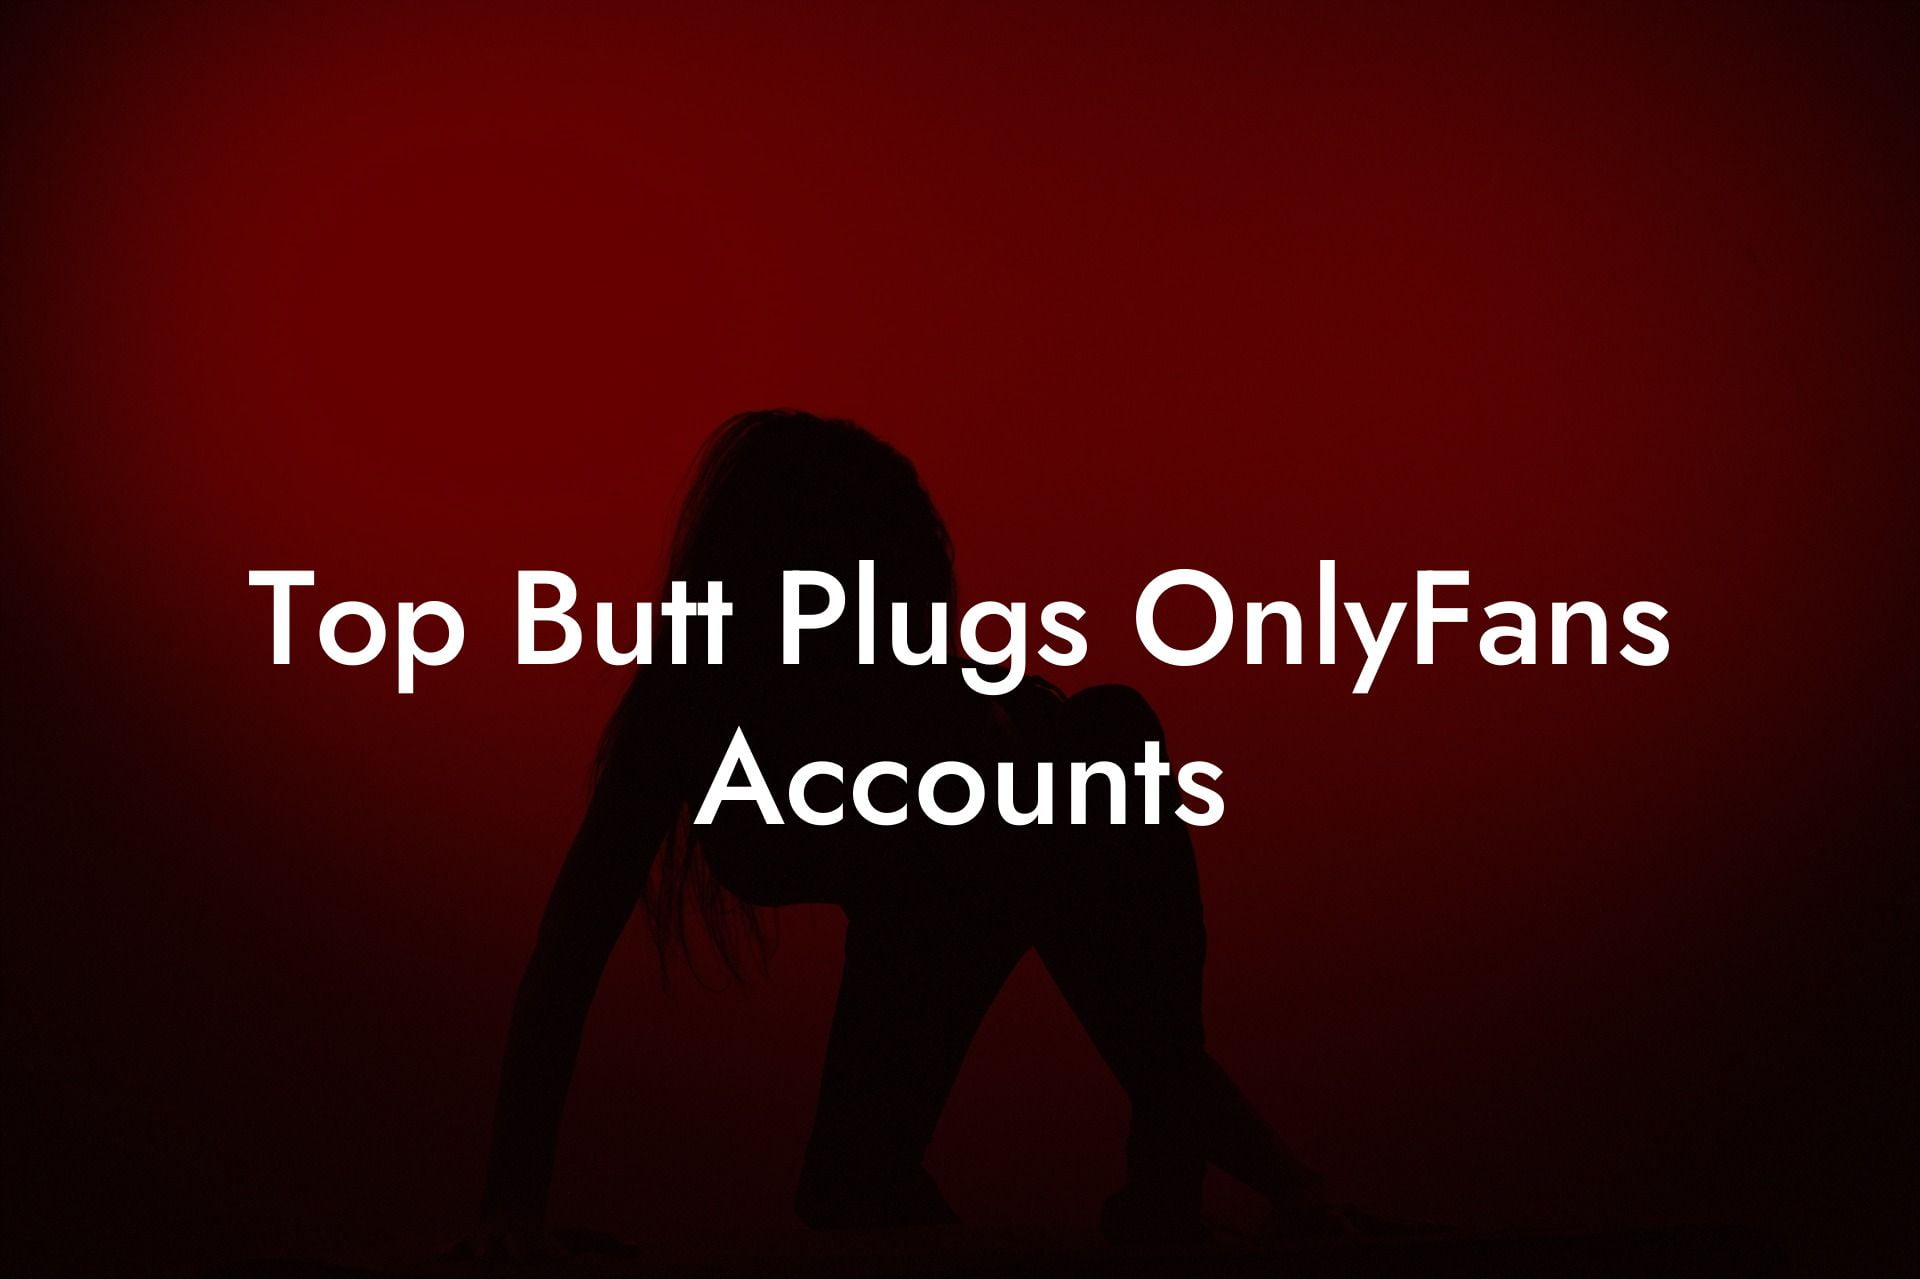 Top Butt Plugs OnlyFans Accounts